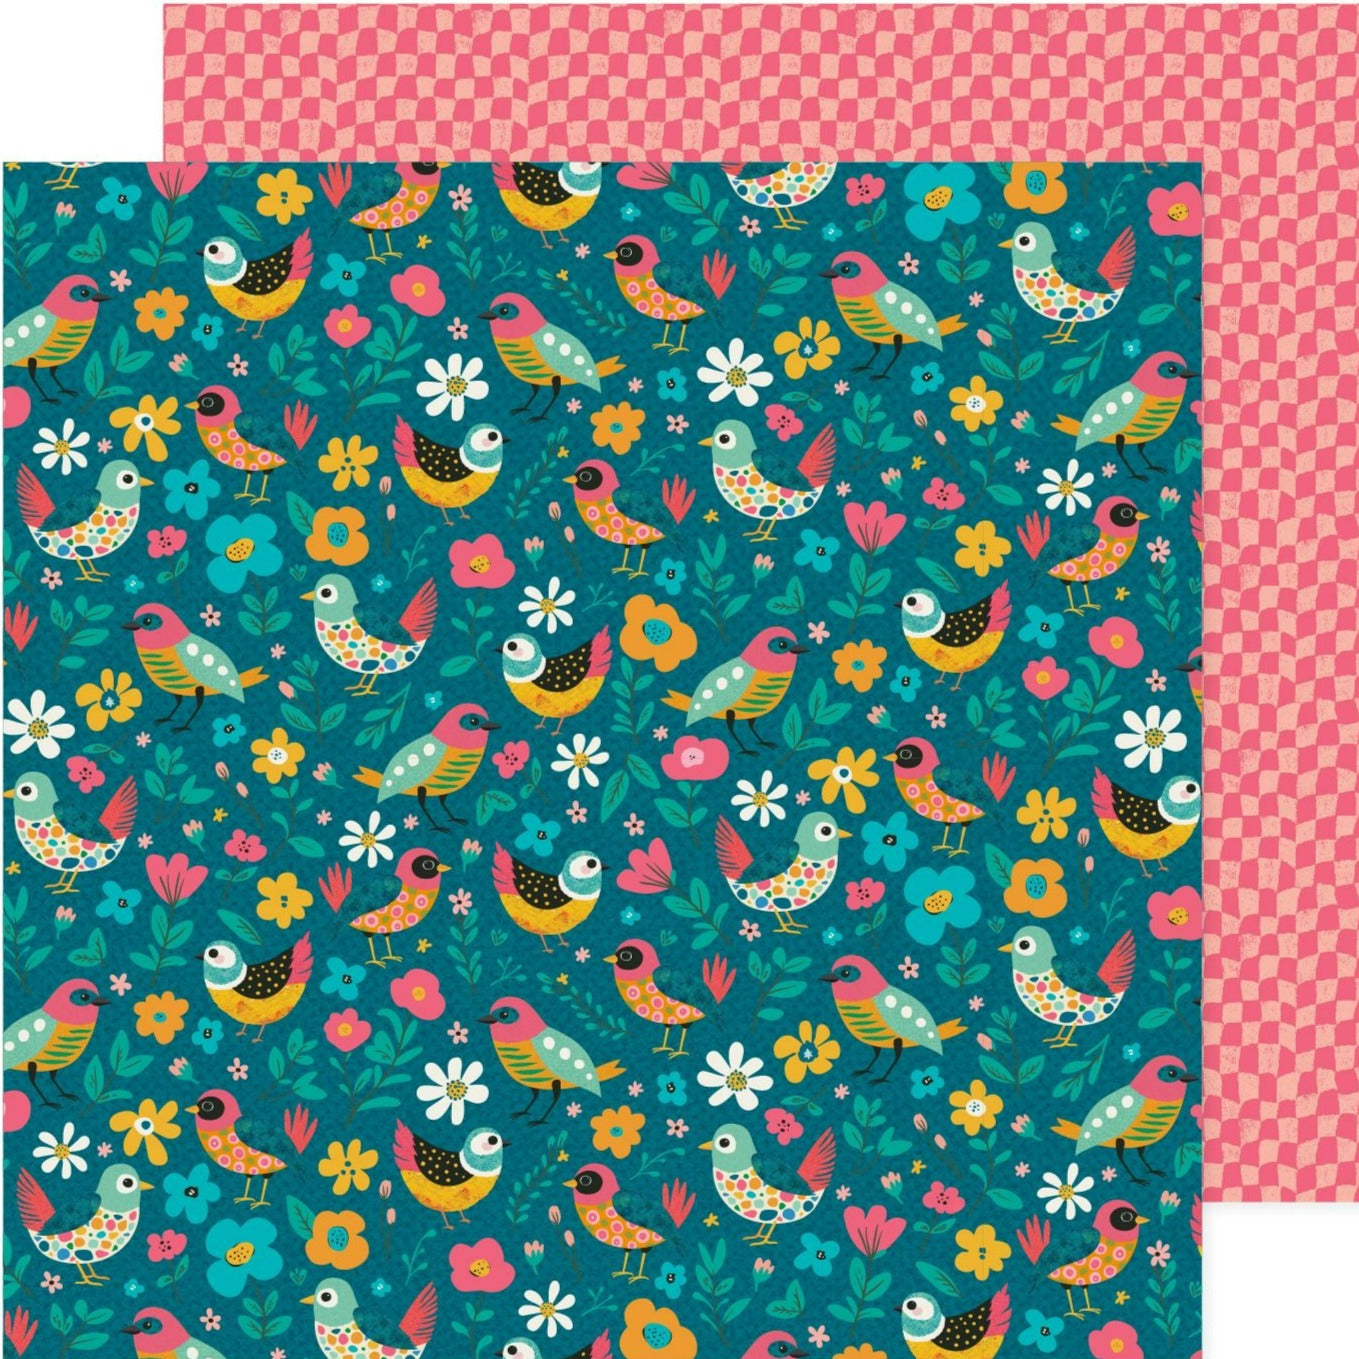 12x12 patterned cardstock. (Side A - bright multi-colored birds, flowers and leaves on a turquoise background; Side B - pink and dark pink wavy gingham) - Archival-safe and acid-free from American Crafts